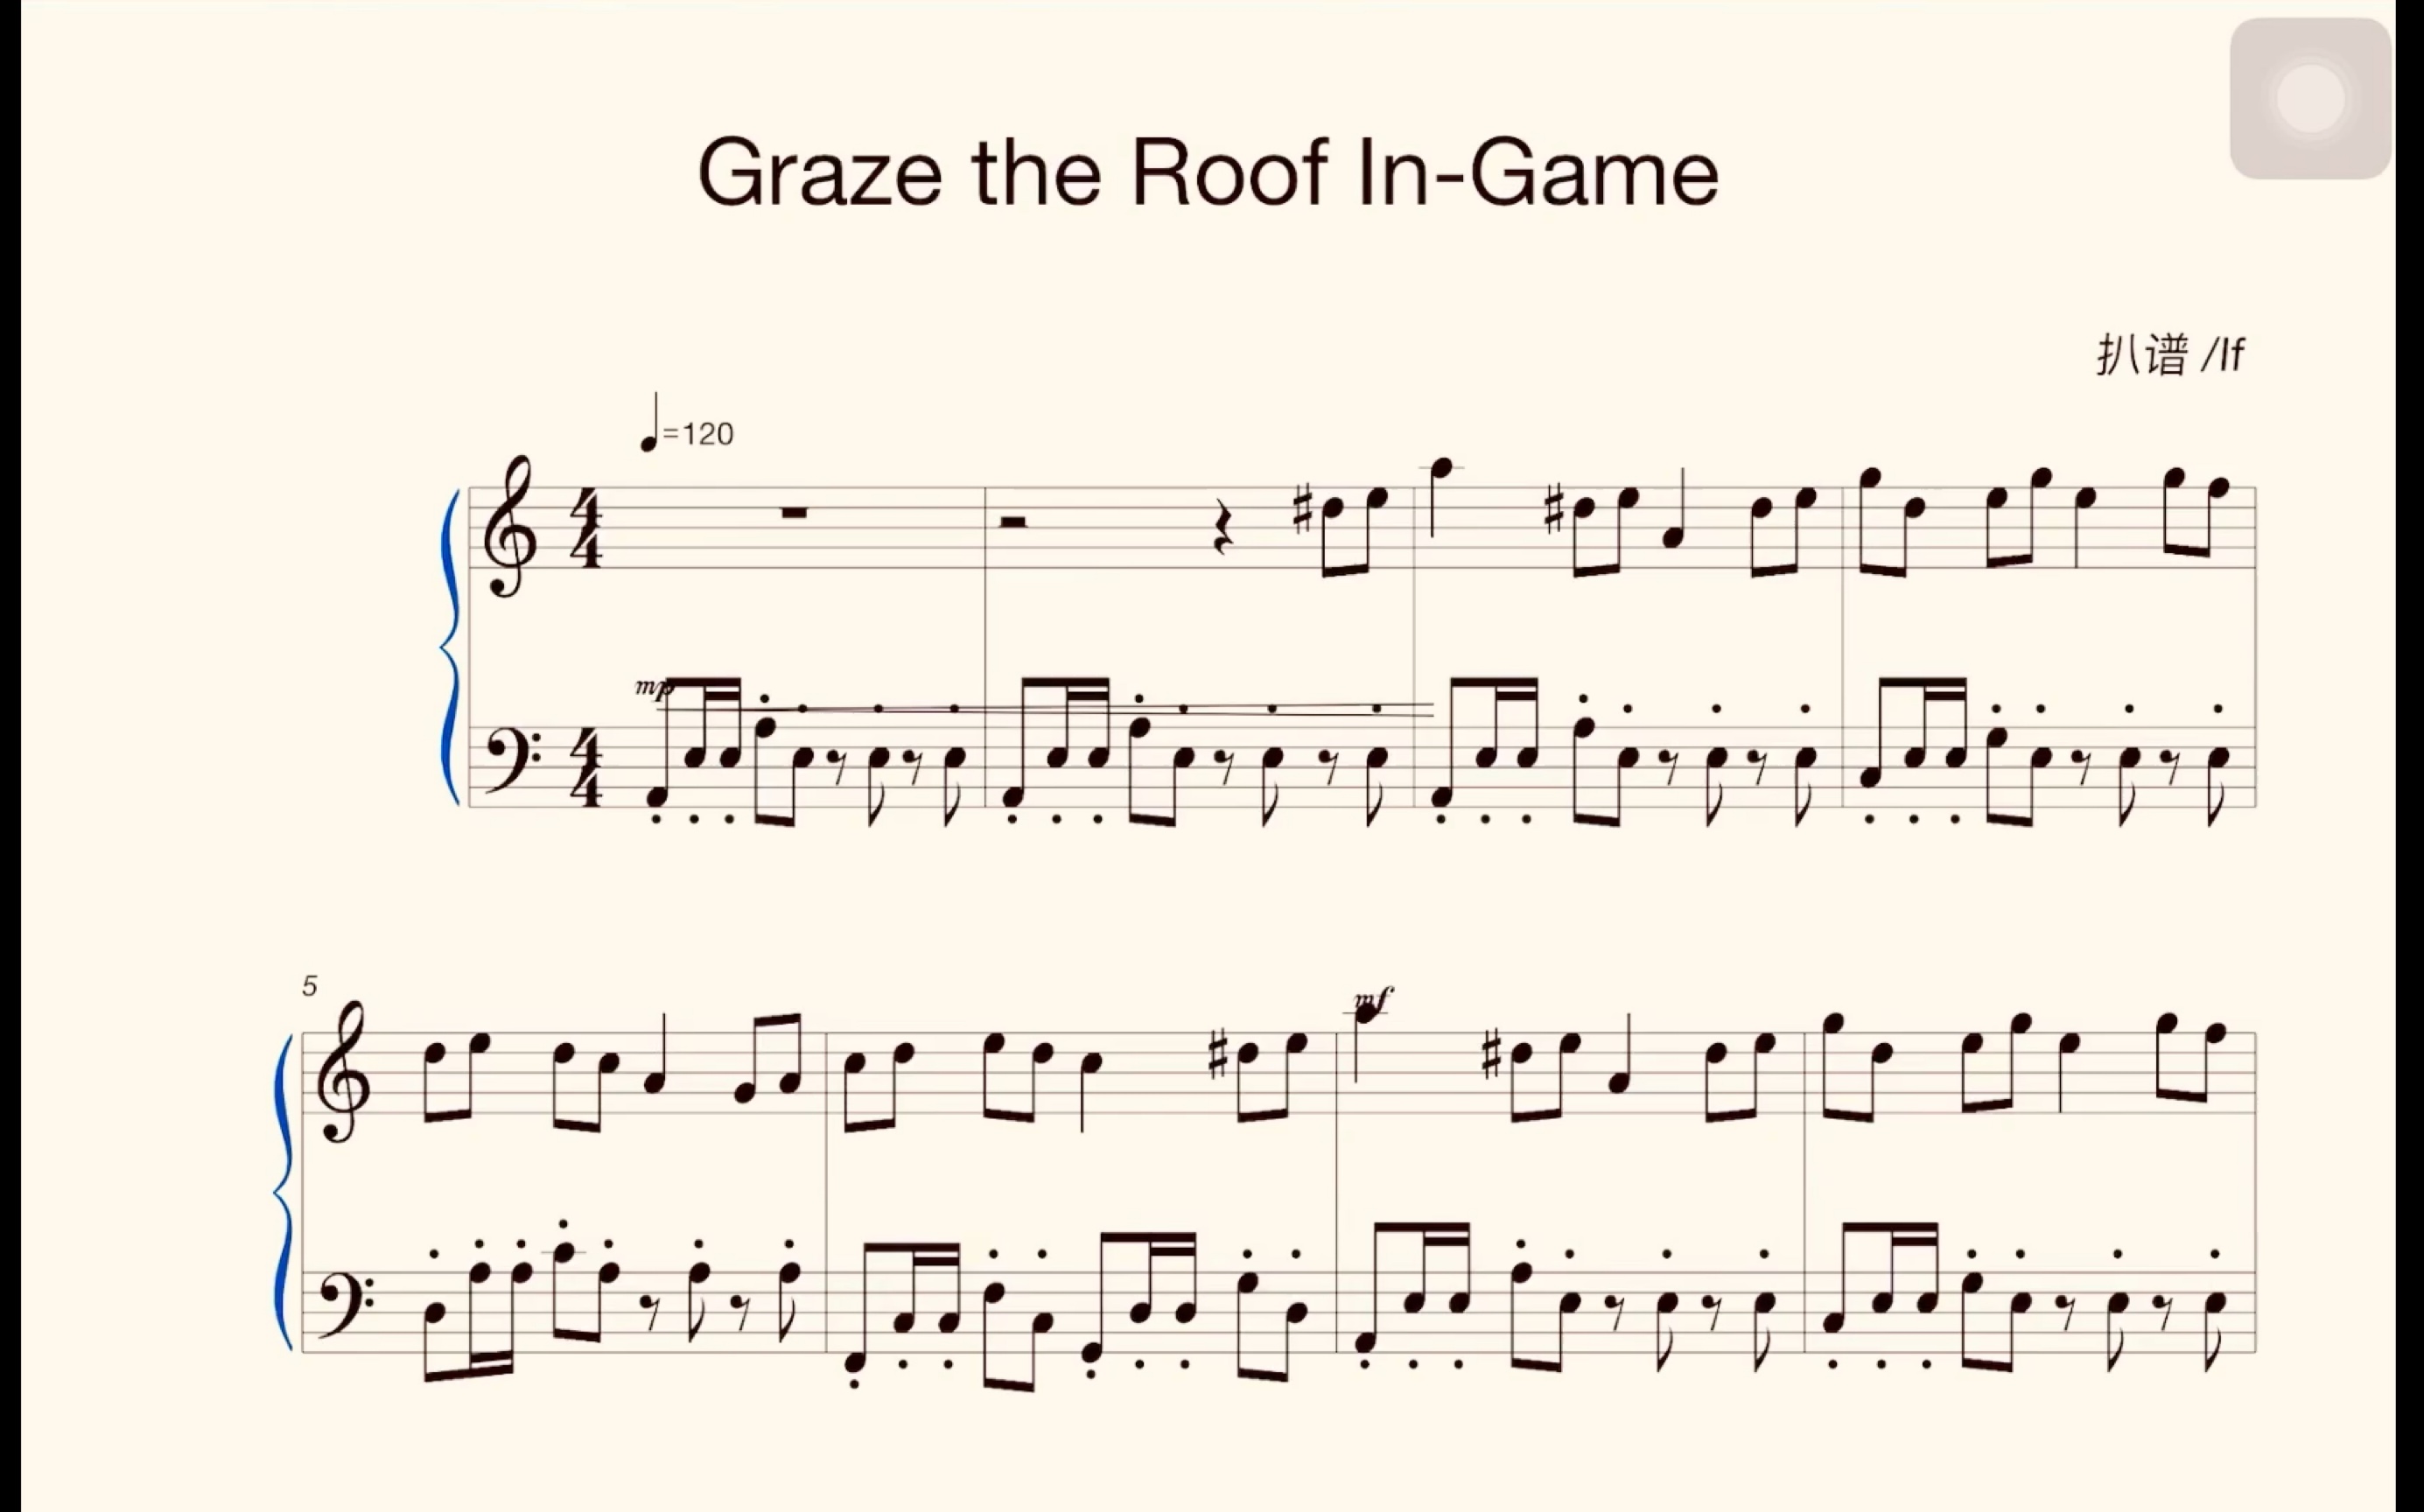 graze the roof吉他谱图片